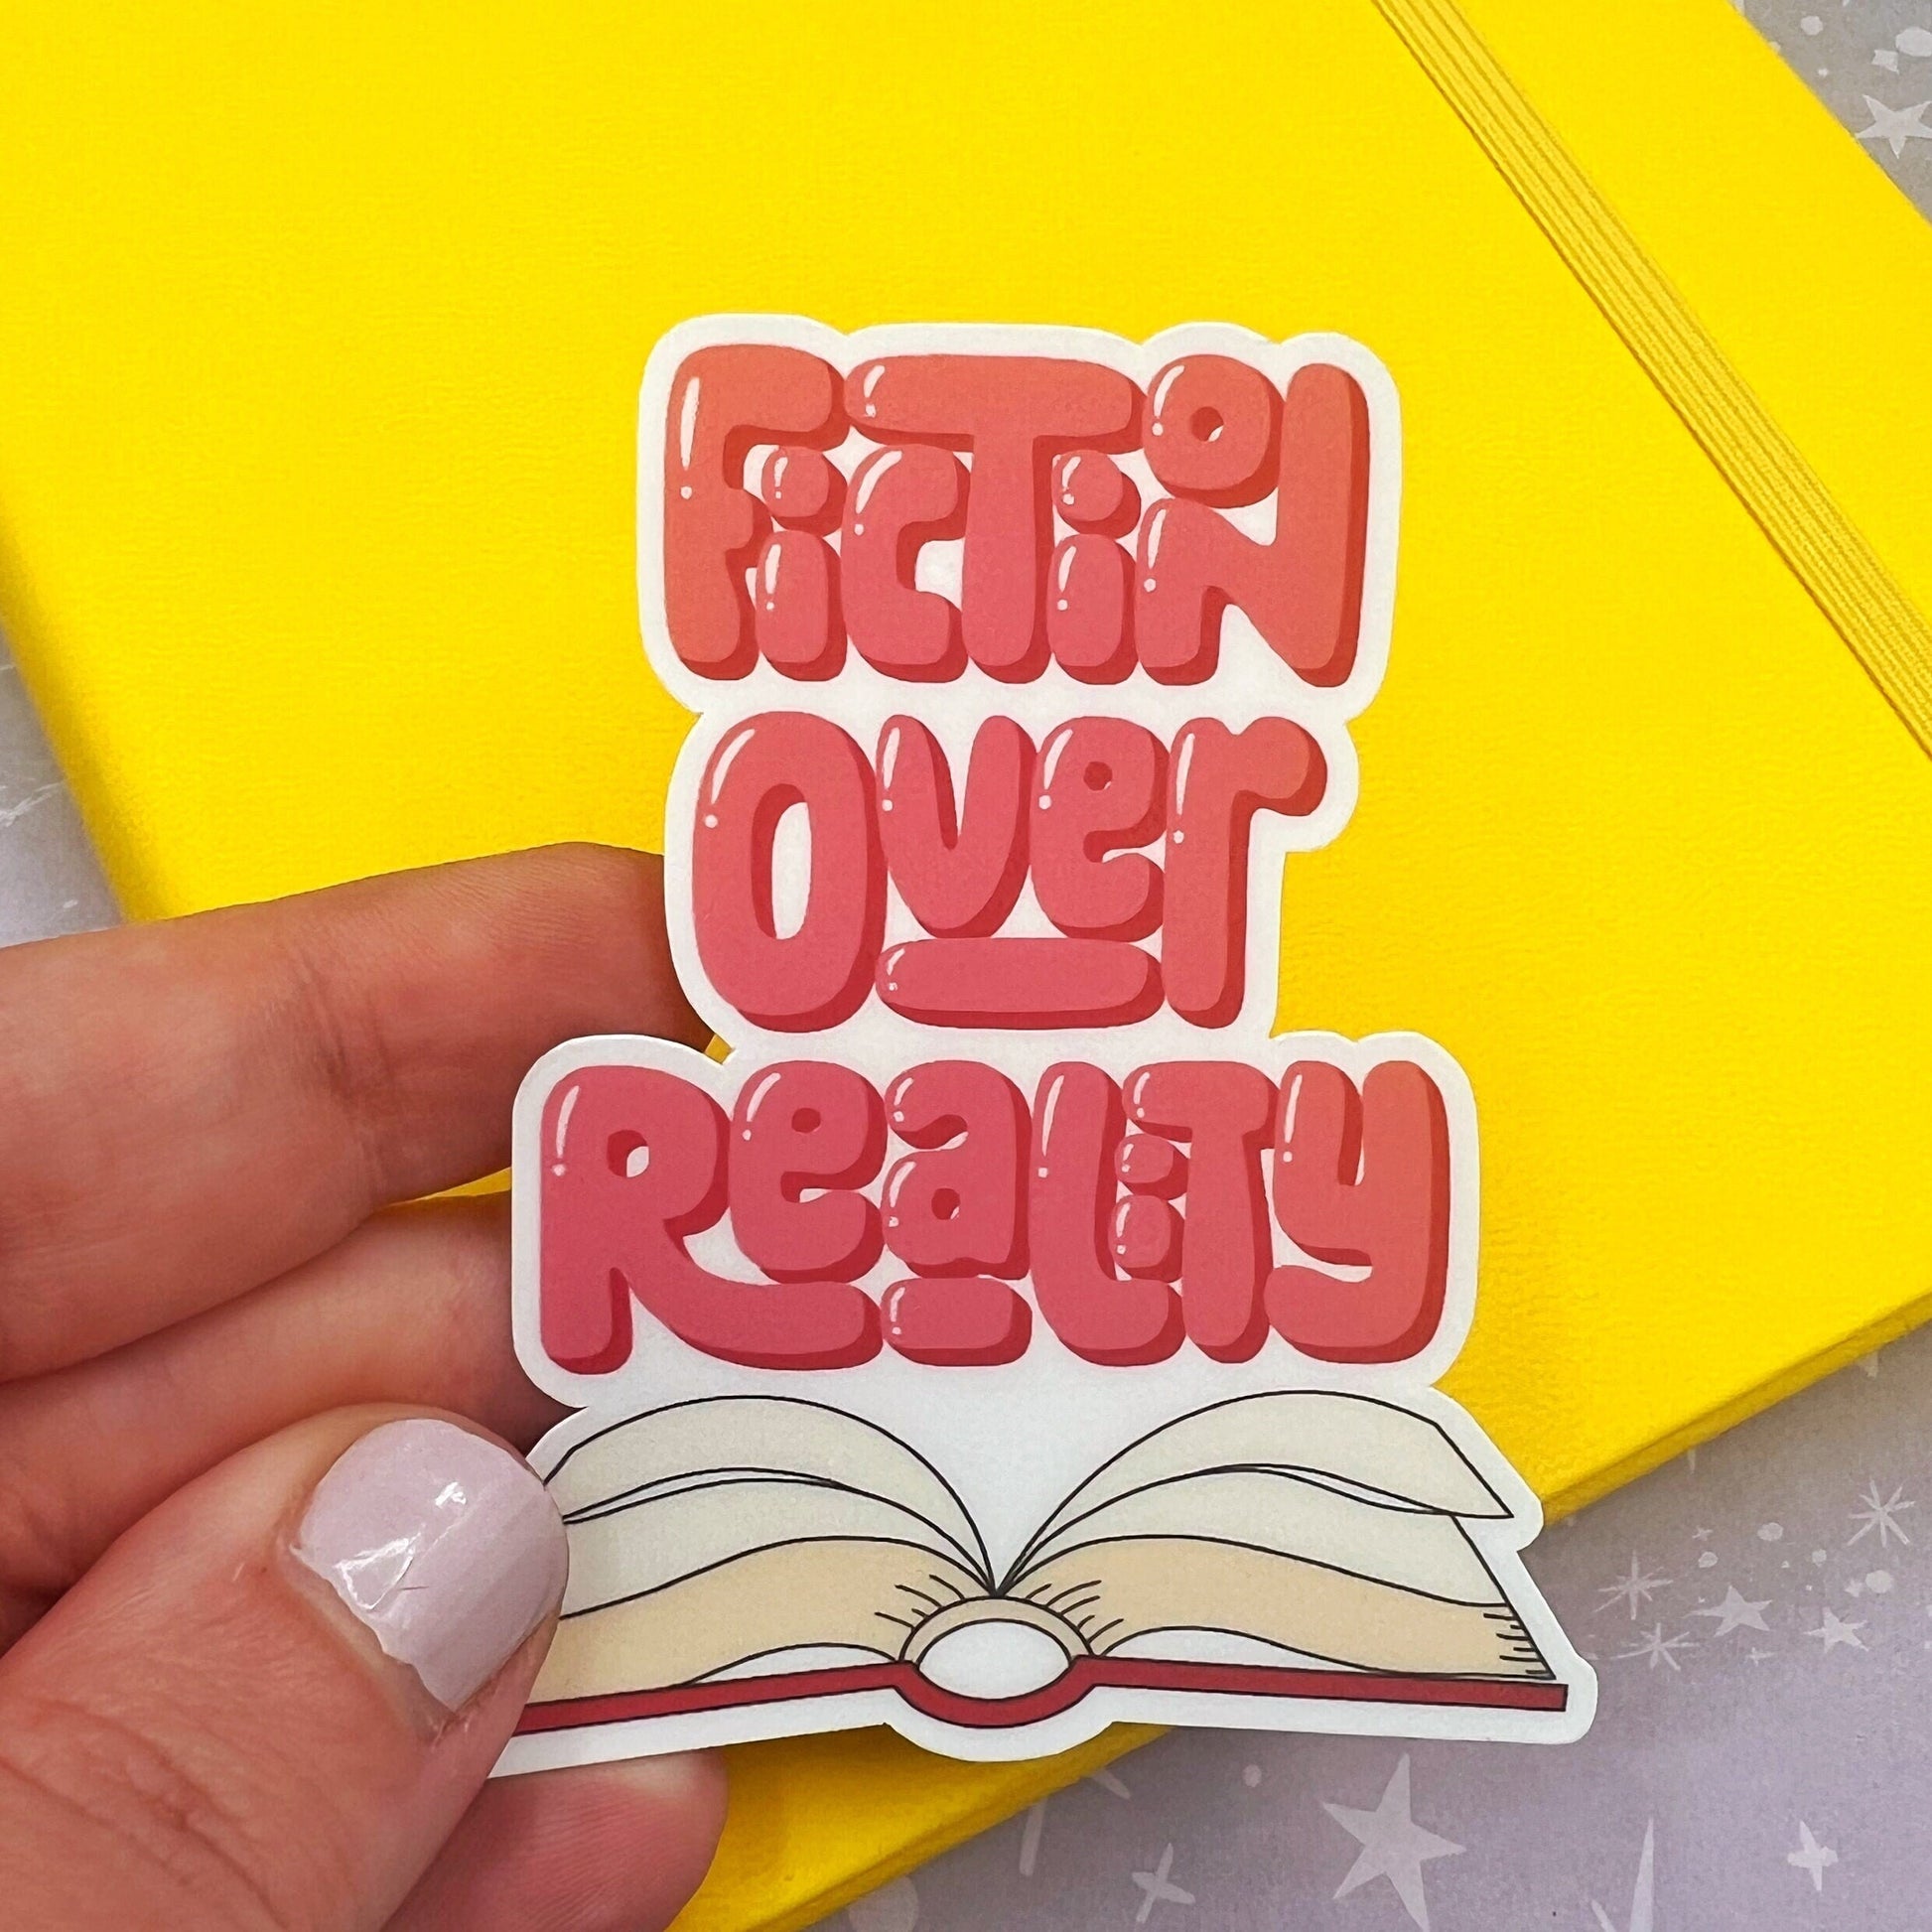 Fiction Over Reality Sticker